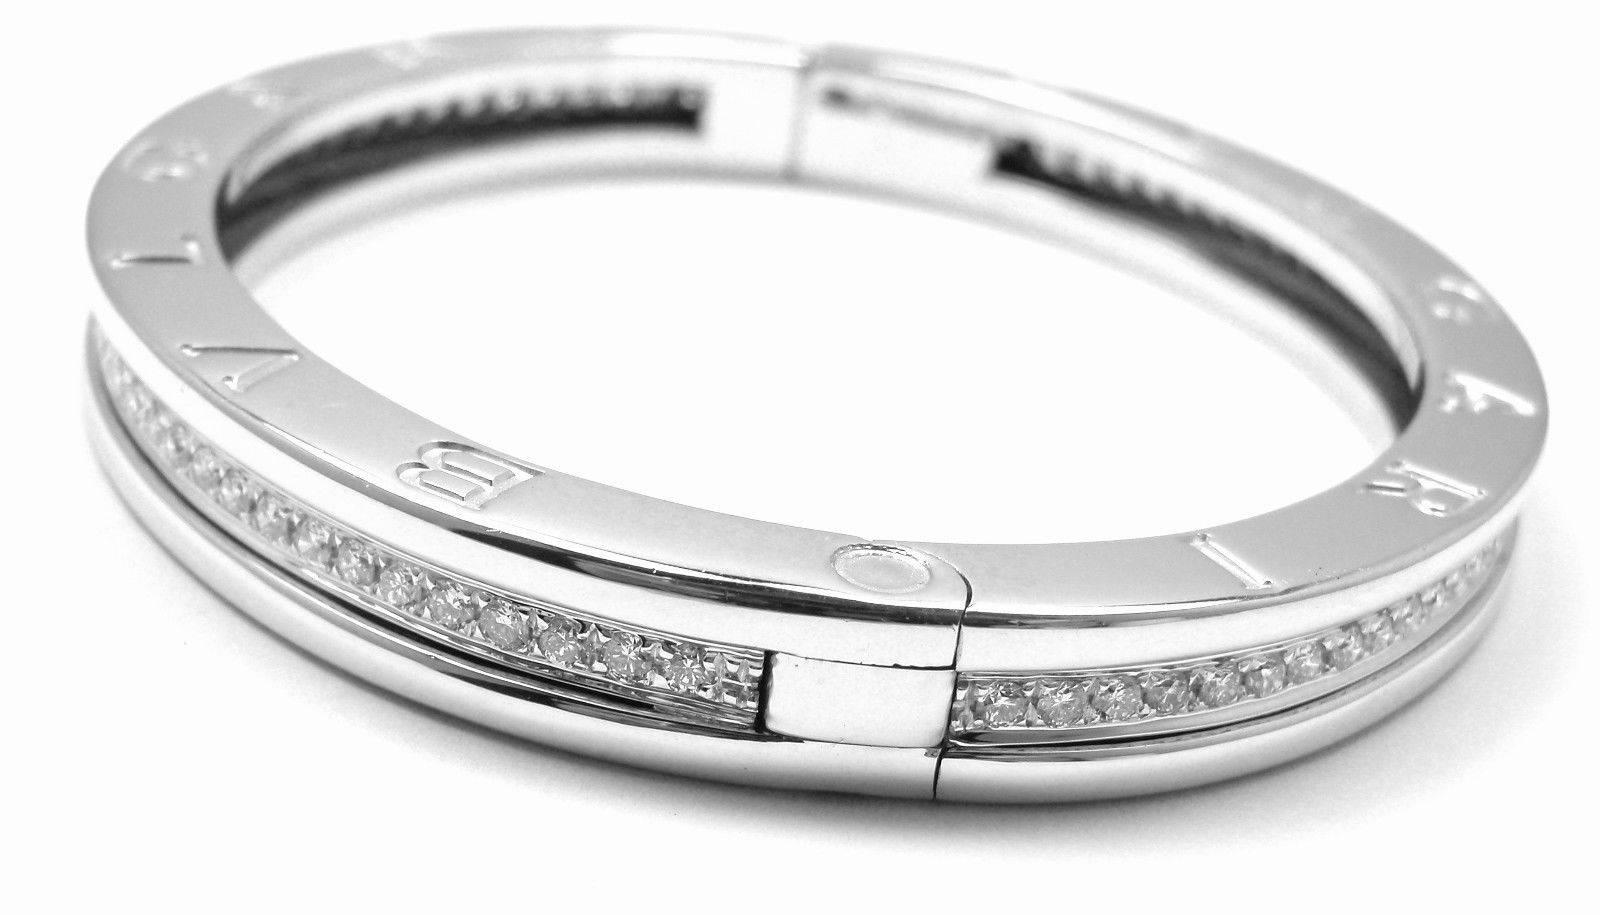 18k White Gold B.Zero Diamond Bangle Bracelet by Bulgari. 
With Round brilliant cut diamonds VVS1 clarity, E color total weight approx. 2ct
This bracelet comes with Bulgari box.

Details: 
Weight: 50.1 grams
Length: 7